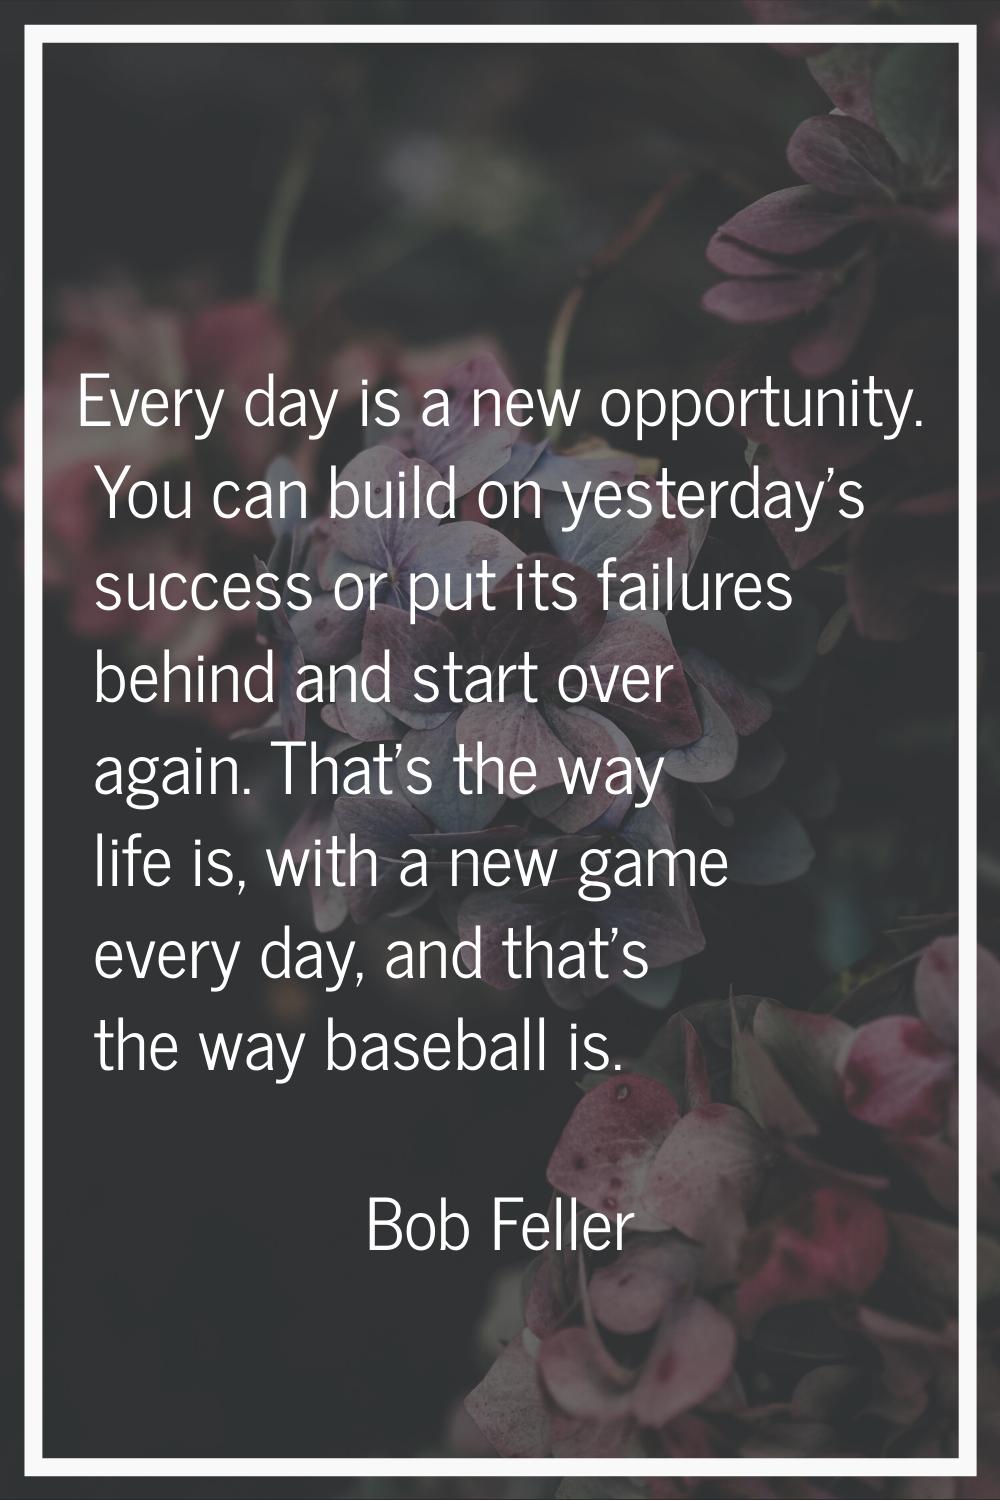 Every day is a new opportunity. You can build on yesterday's success or put its failures behind and